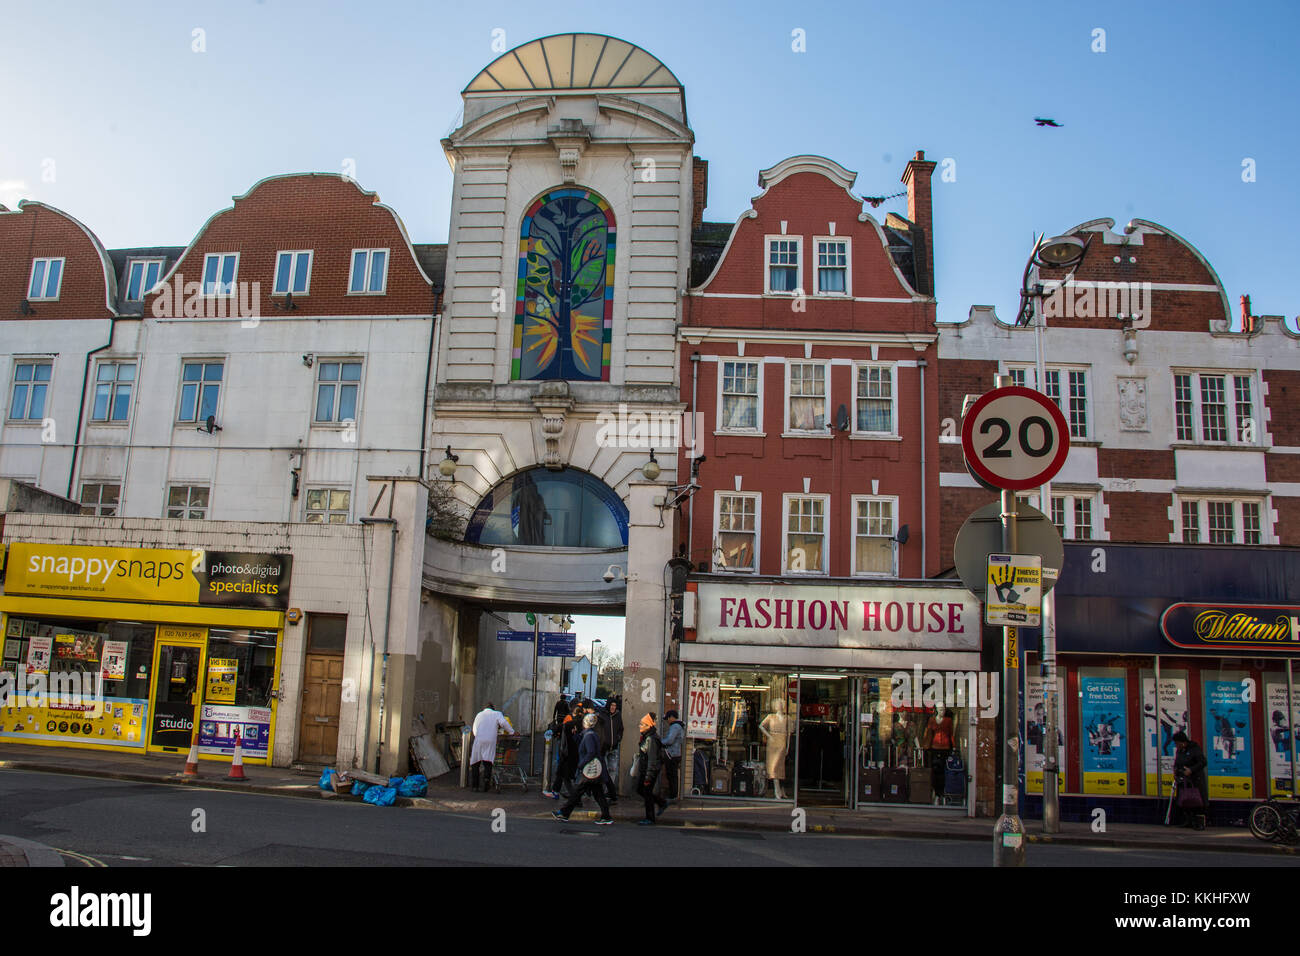 Peckham, London, UK. 1 December 2017.  The ornate pedestrian entrance to the car park   flanked by Snappy Snaps and the Fashion House on Rye Lane. David Rowe/Alamy Live News. Stock Photo